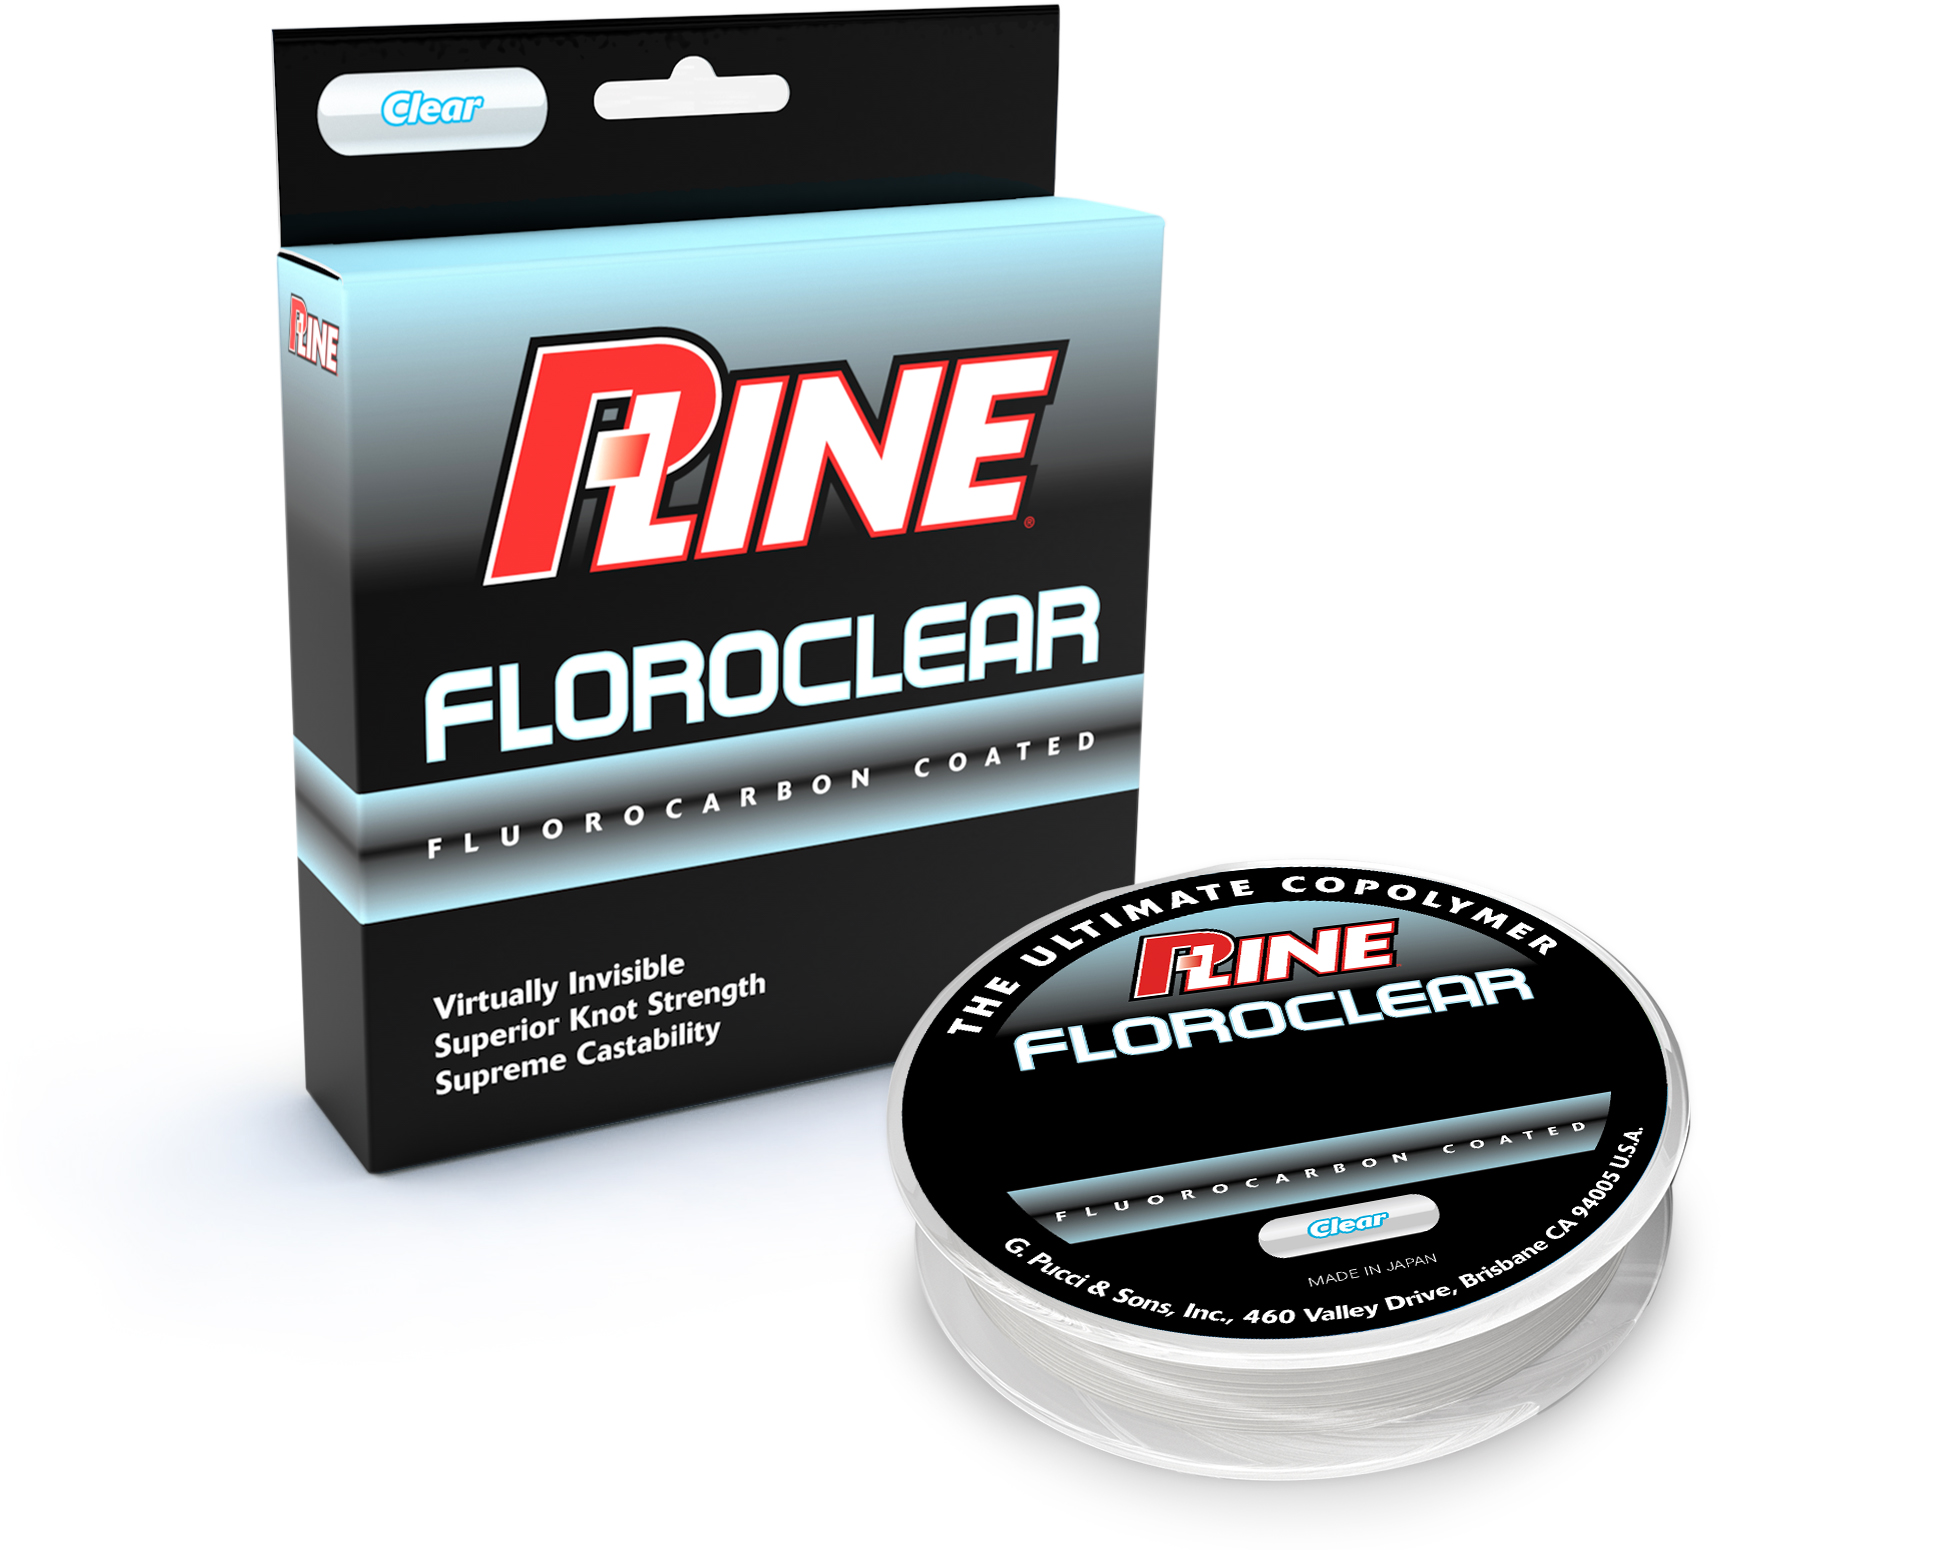 P-Line Floroclear Fluorocarbon Coated Copolymer Fishing Line Clear 8lb 600yd for sale online 